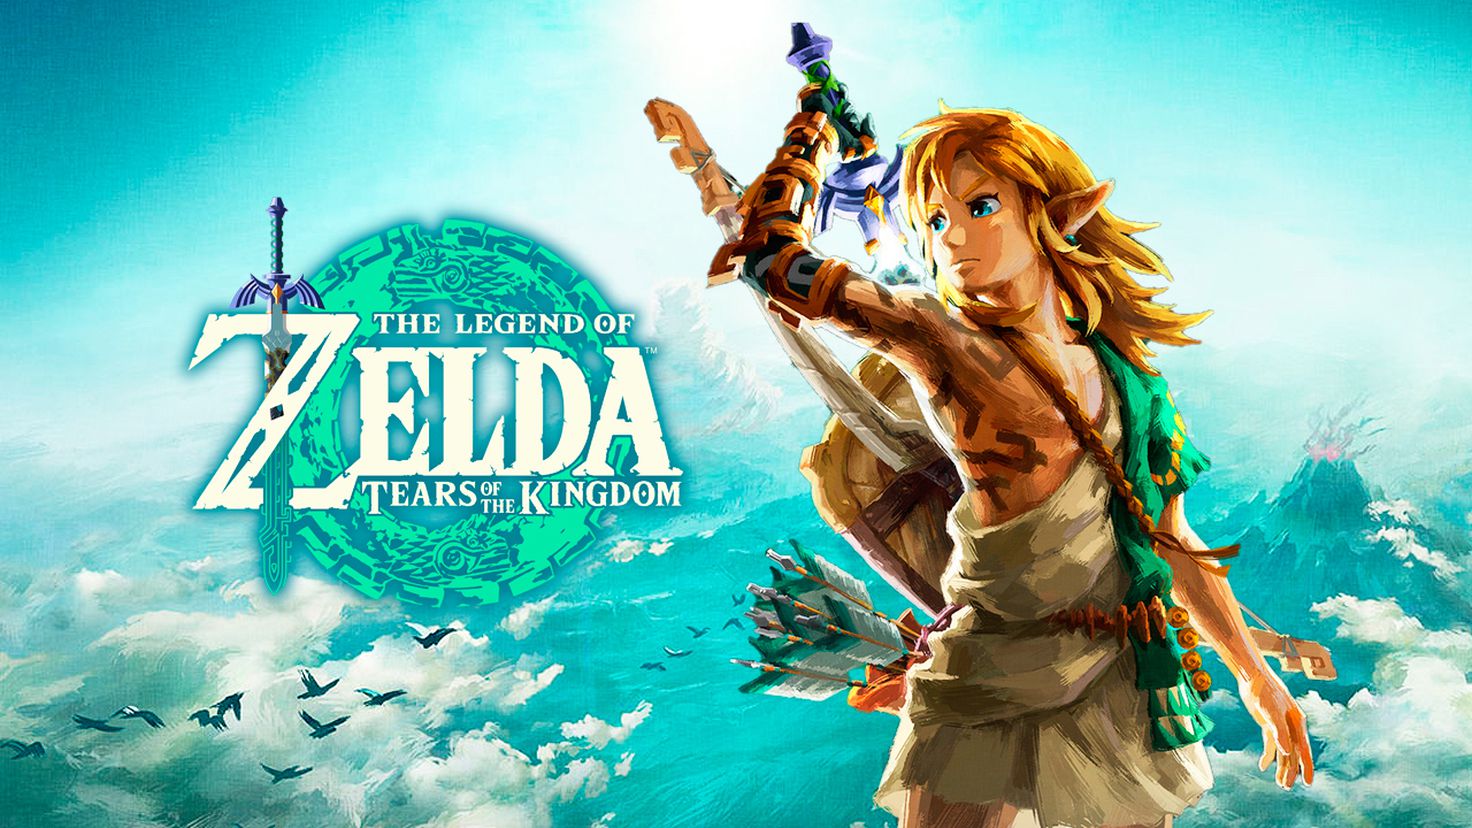 The Legend of Zelda: Tears of the Kingdom breaks all OpenCritic records